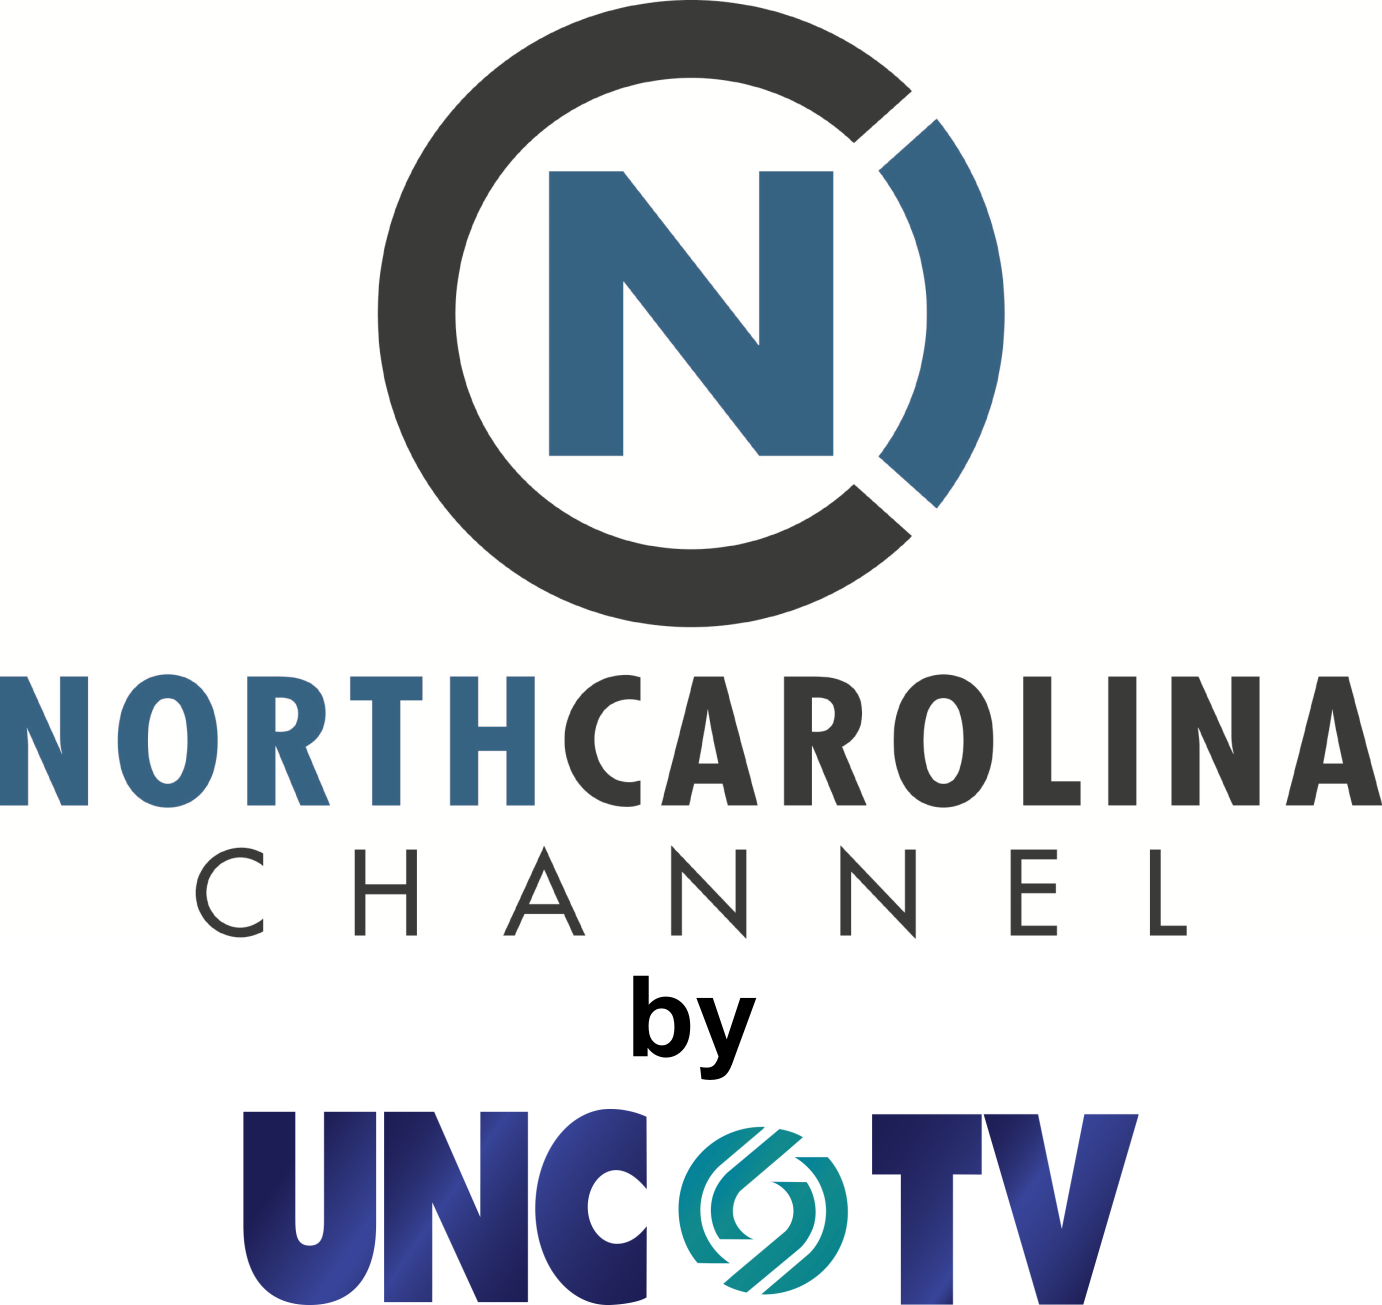 The North Carolina Channel - UNC TV. Stories with a local accent.